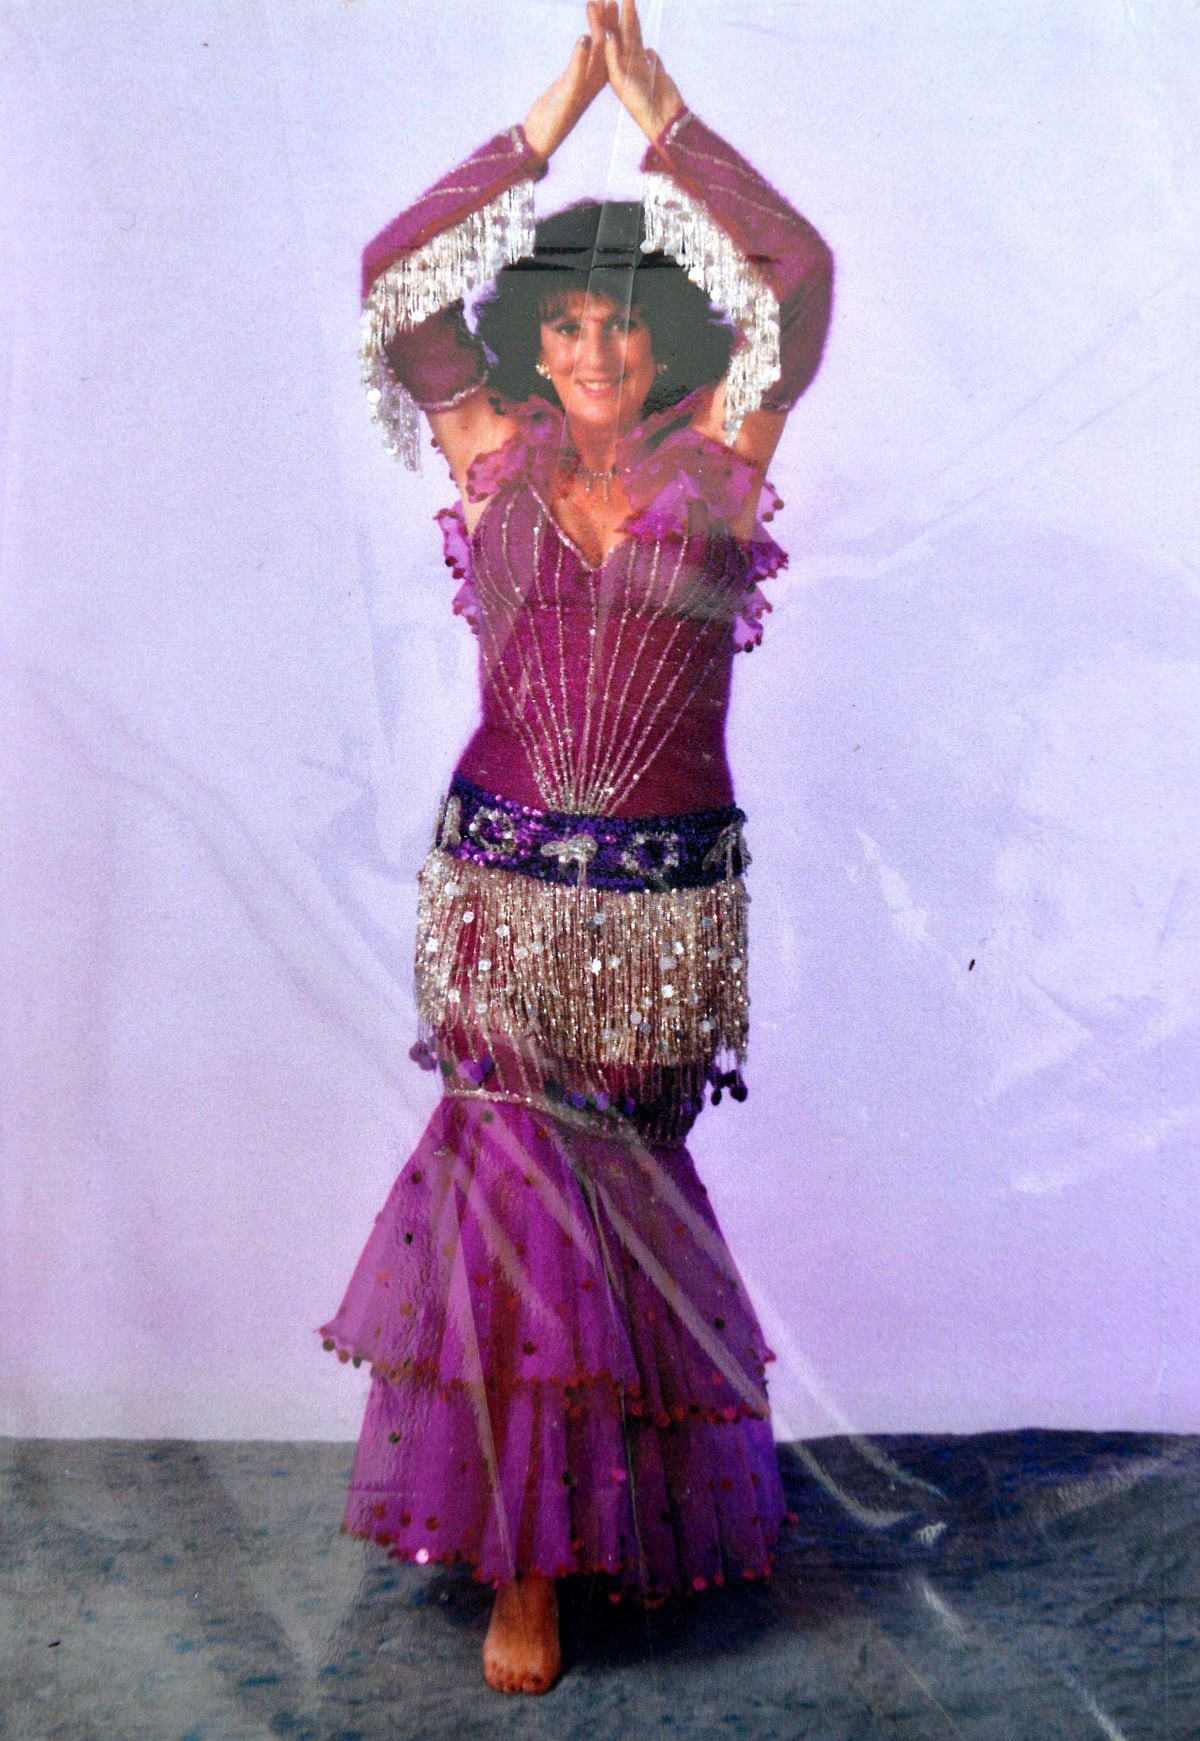 Master of the Sacred Dance, otherwise known as Belly Dancing: Tina Hobin aged 80